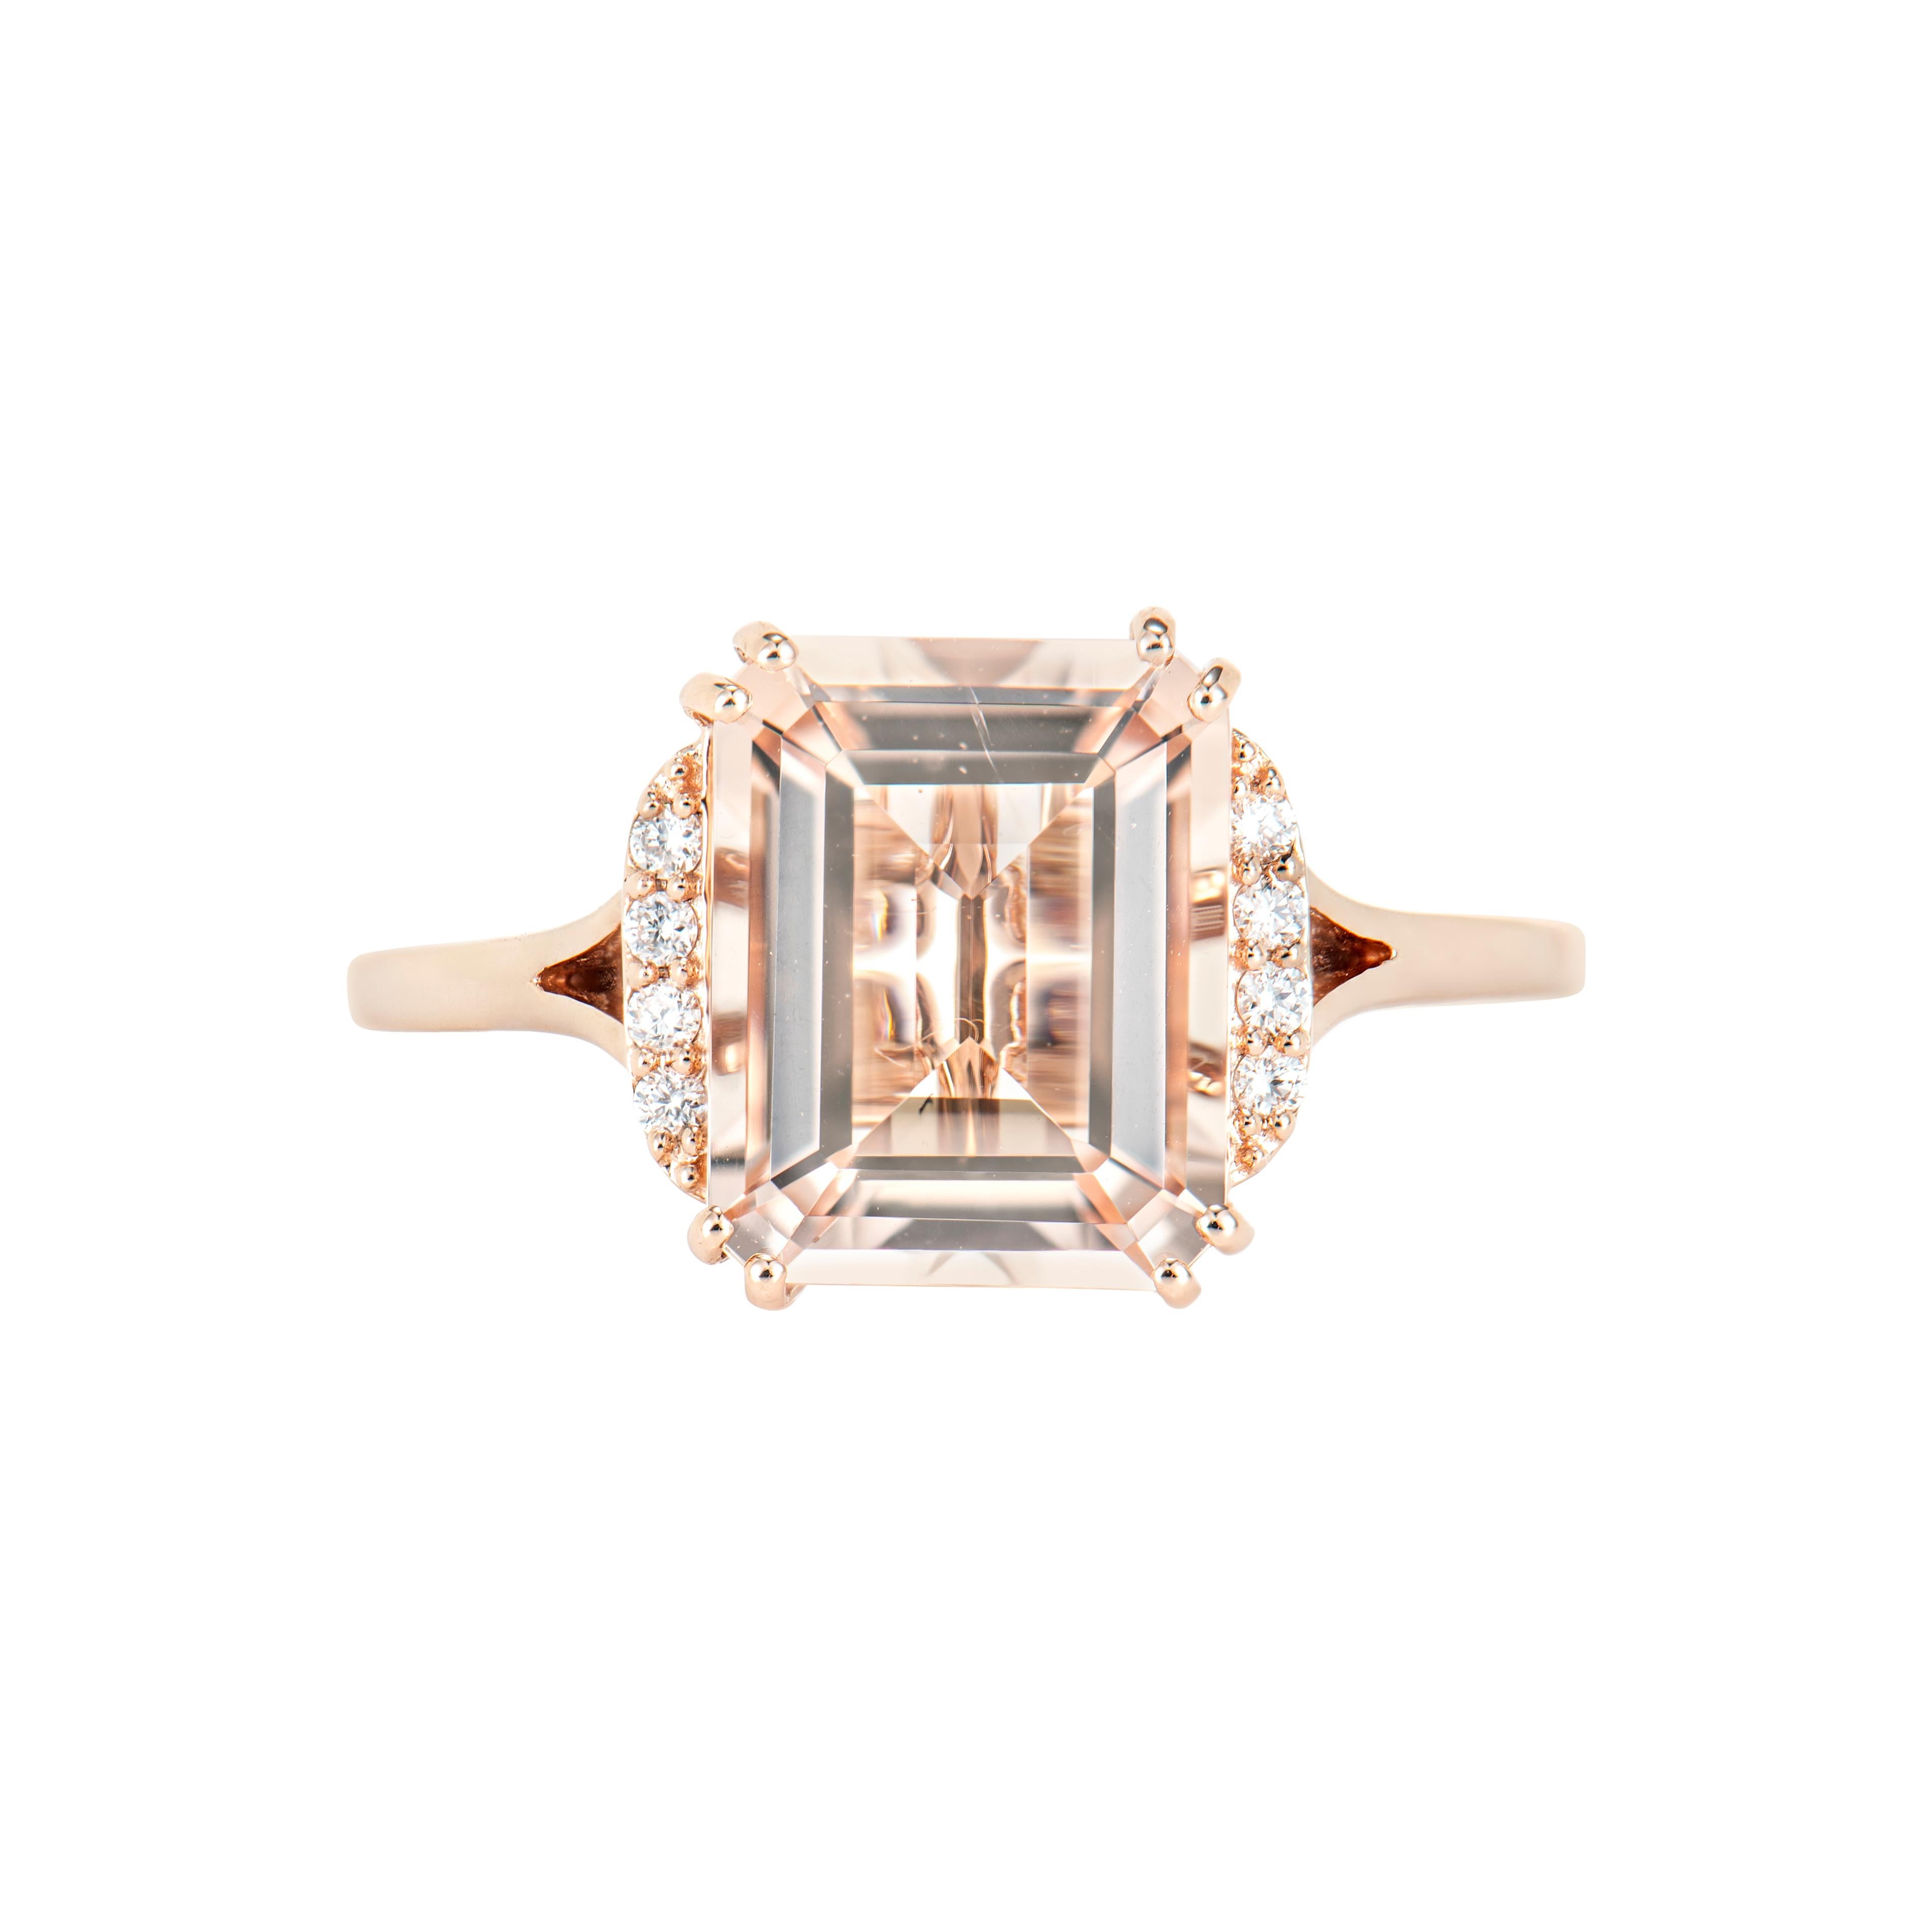 Contemporary 2.87 Carat Morganite Fancy Ring in 18Karat Rose Gold with White Diamond.   For Sale